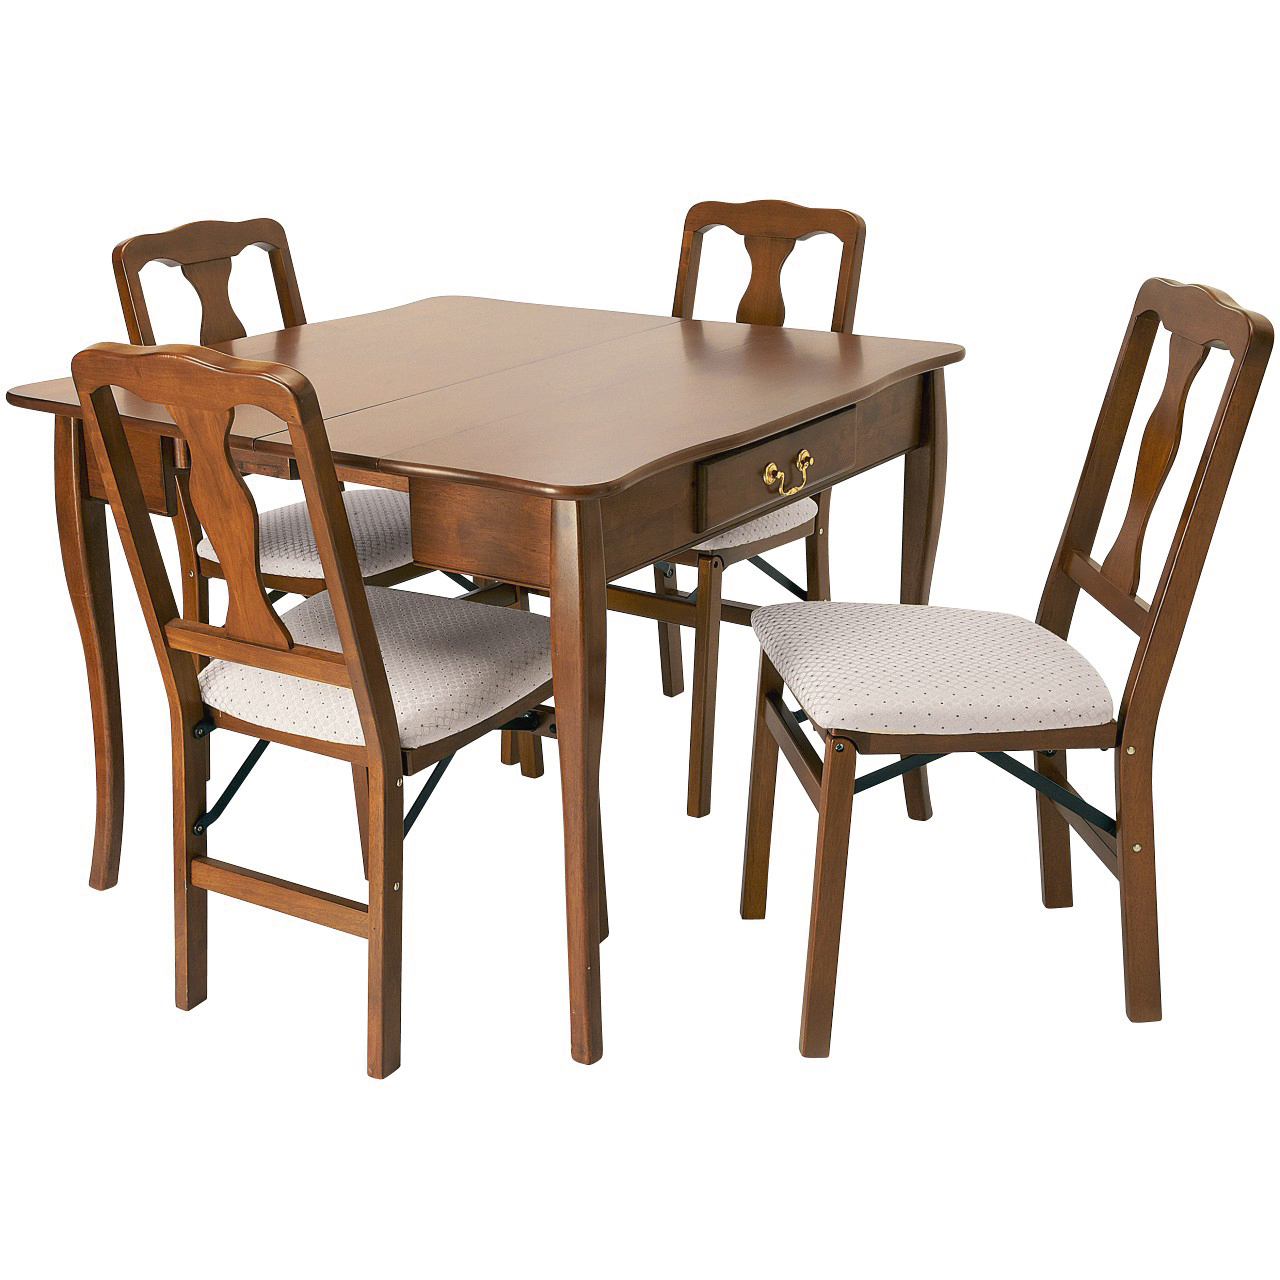 3-in-1 Convertible Dining Table